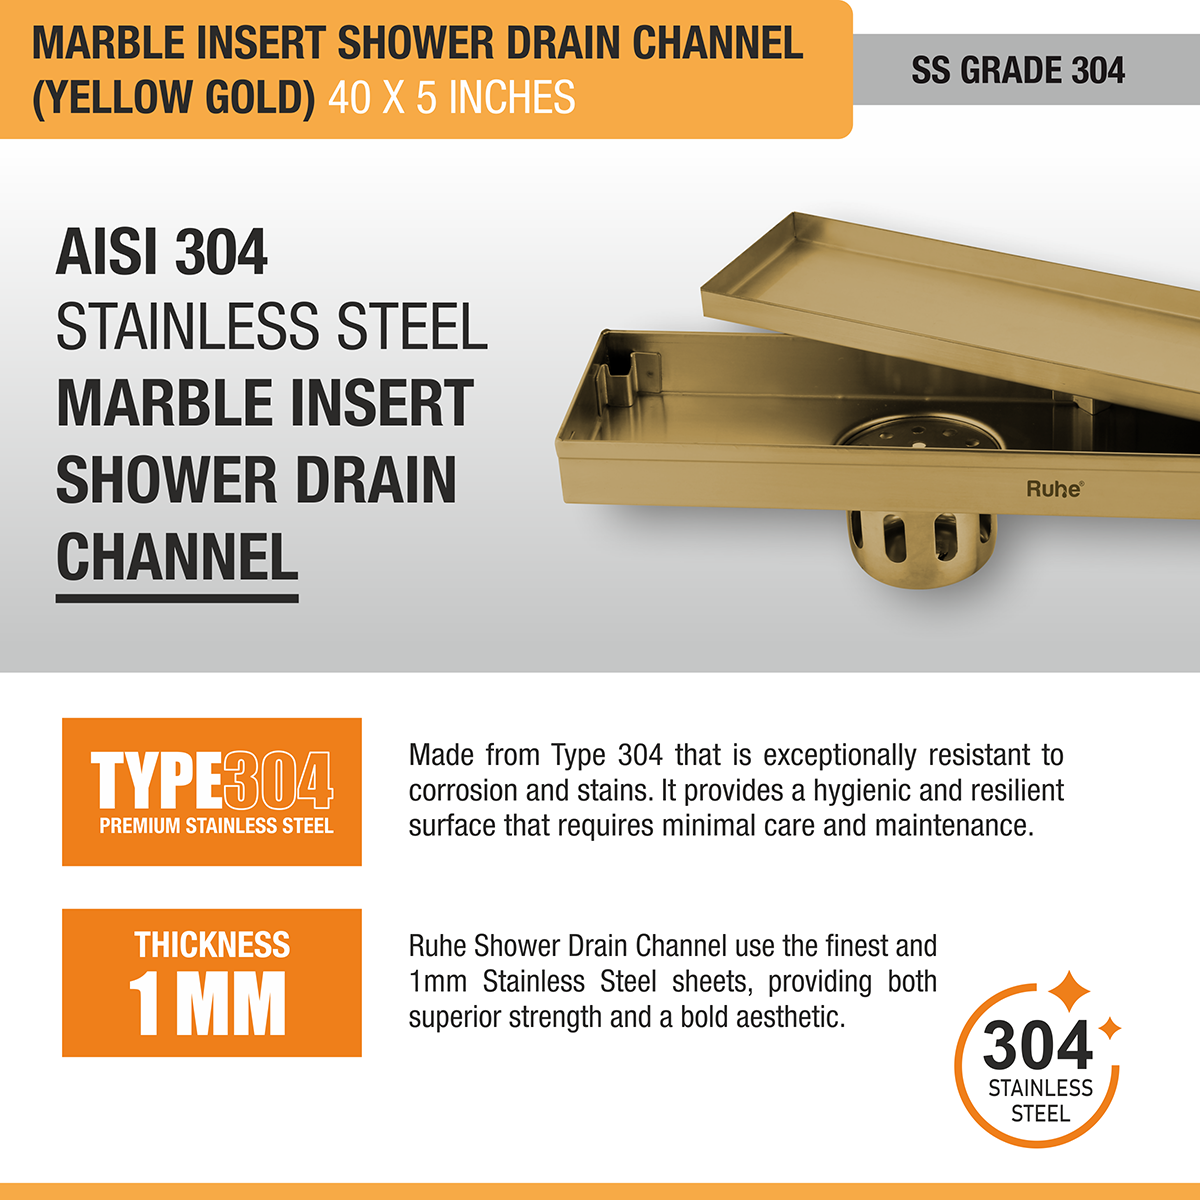 Marble Insert Shower Drain Channel (40 x 5 Inches) YELLOW GOLD PVD Coated stainless steel